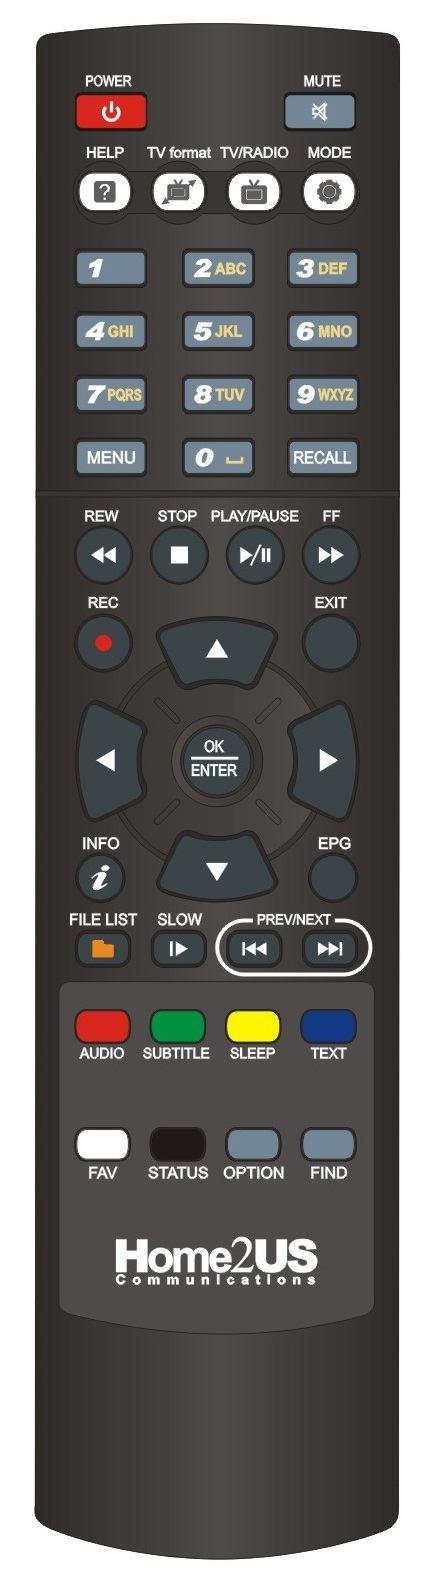 5 HARDWARE: 5.1 REMOTE CONTROL POWER. By pressing this button, the receiver will go into standby mode. When the receiver is in standby mode, it can be awakened by pressing this button again. MUTE.